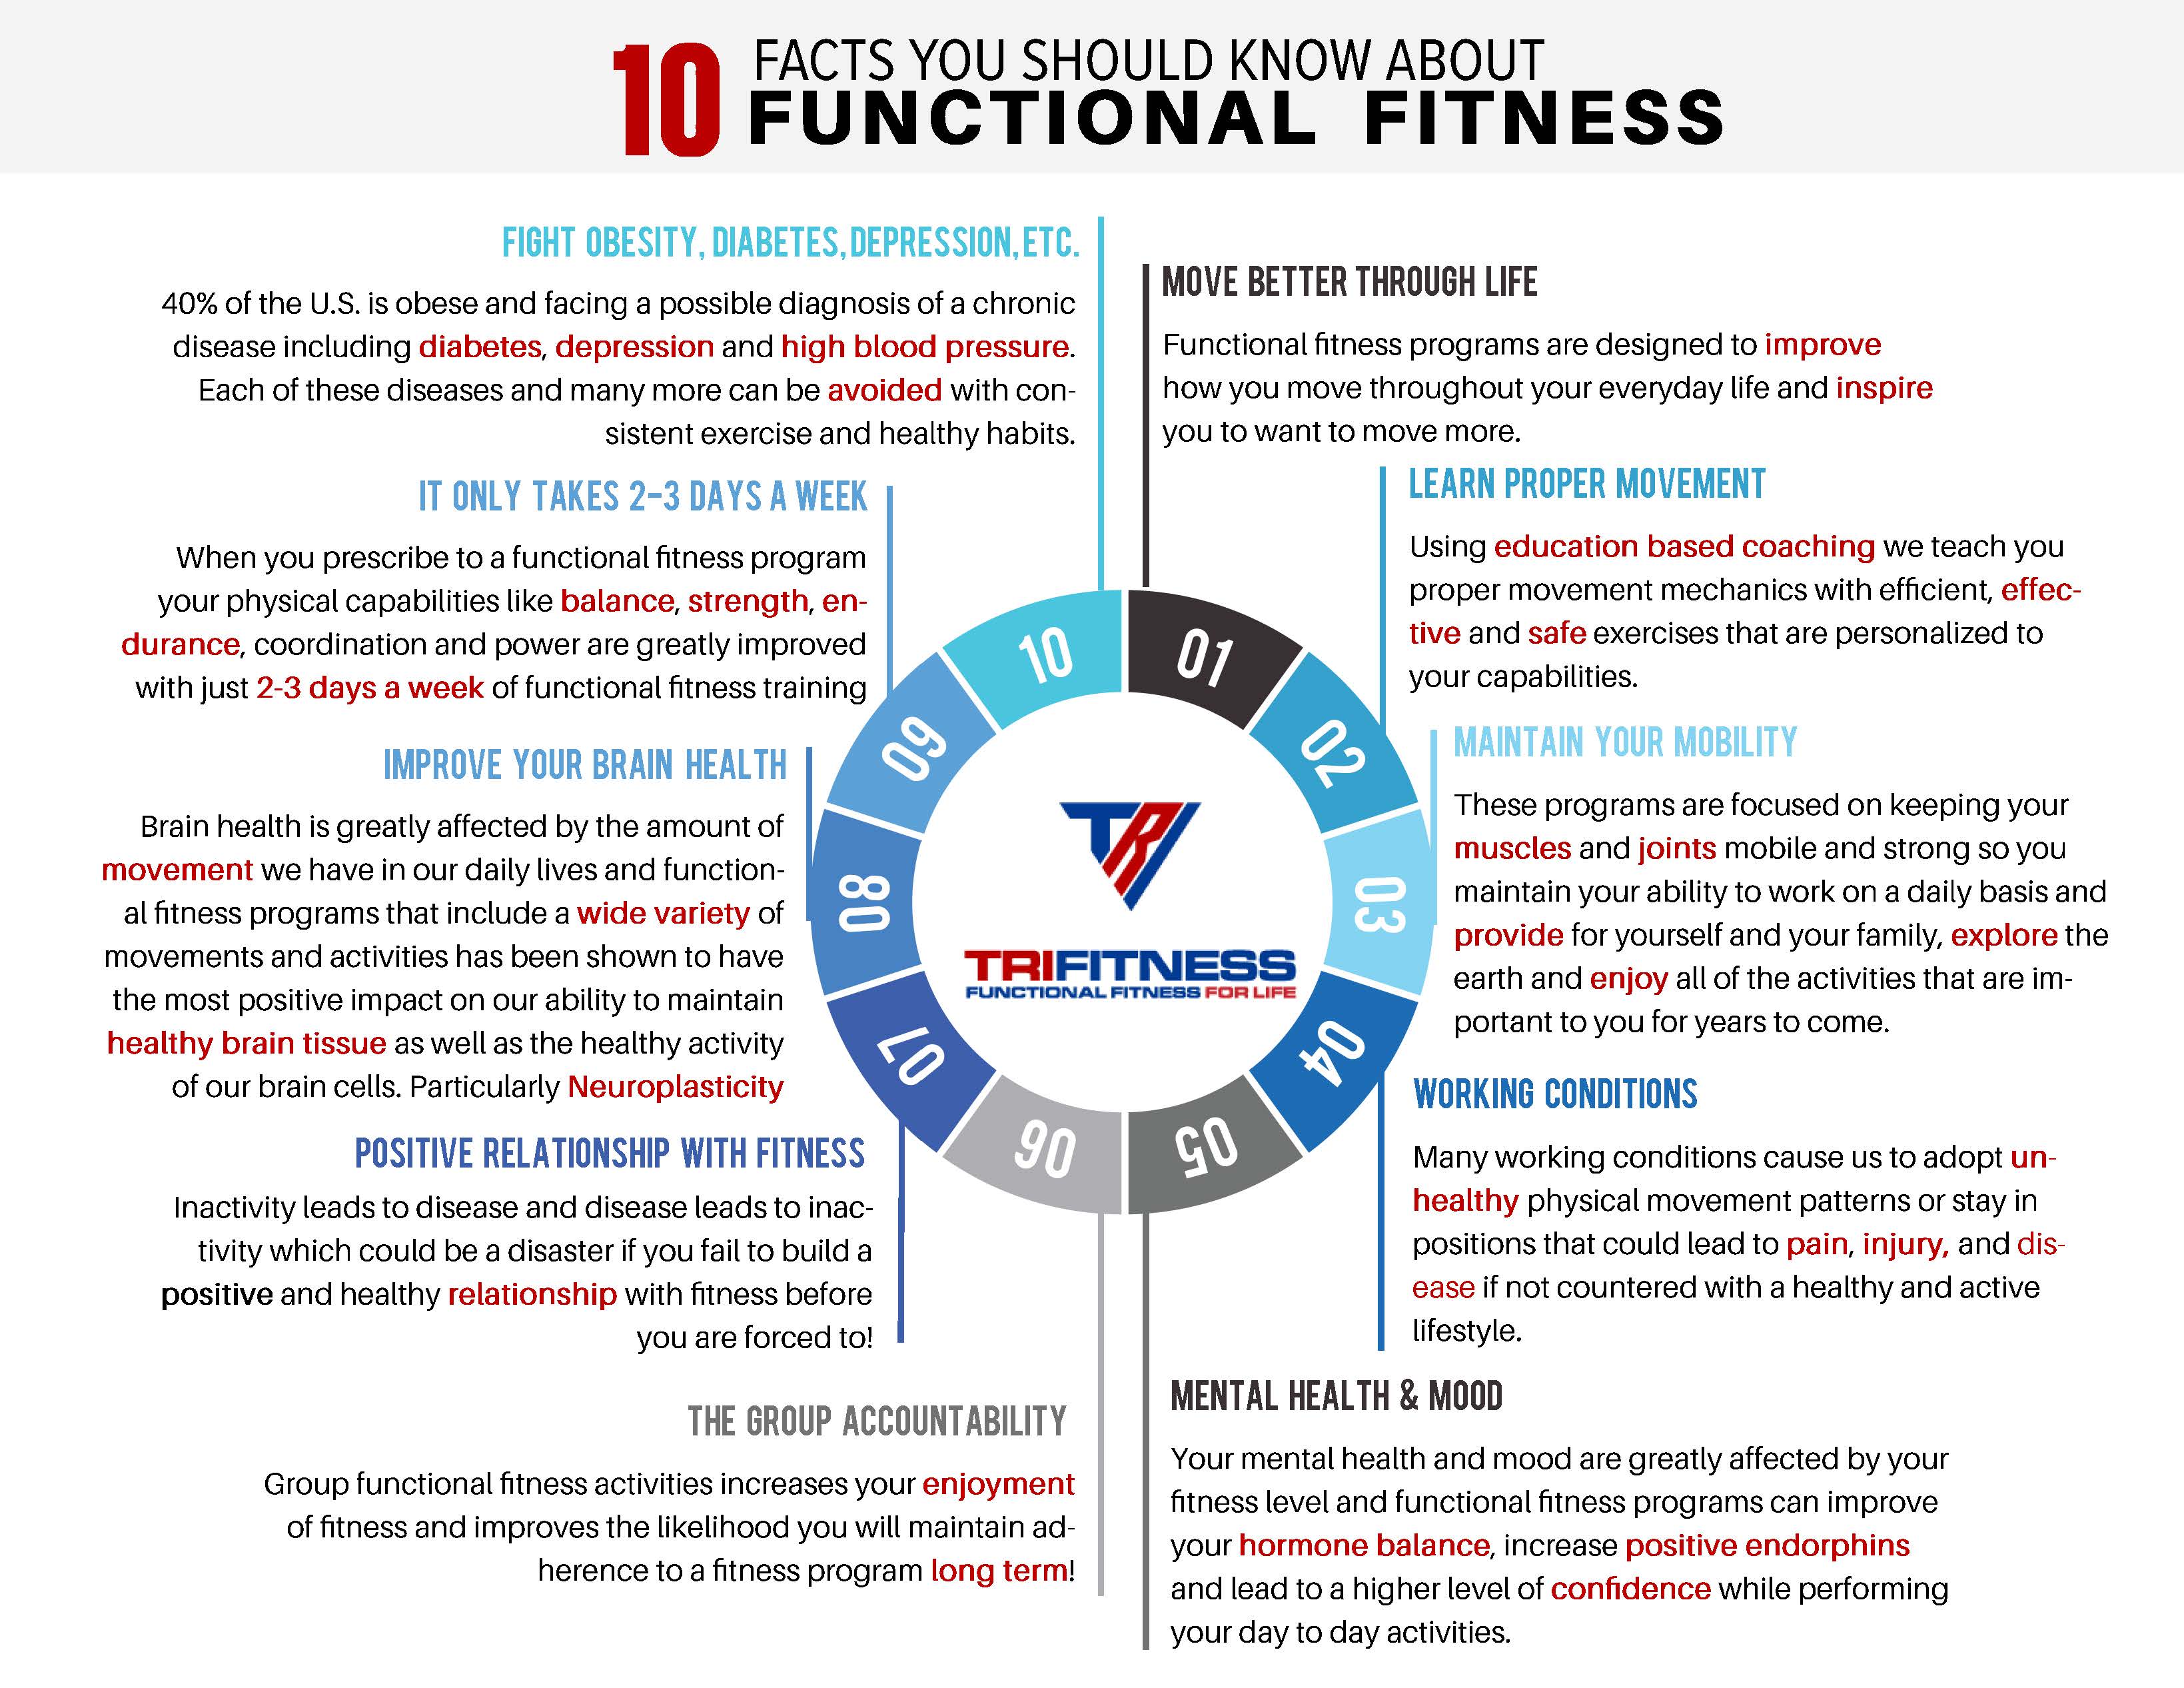 10 Functional Fitness Facts